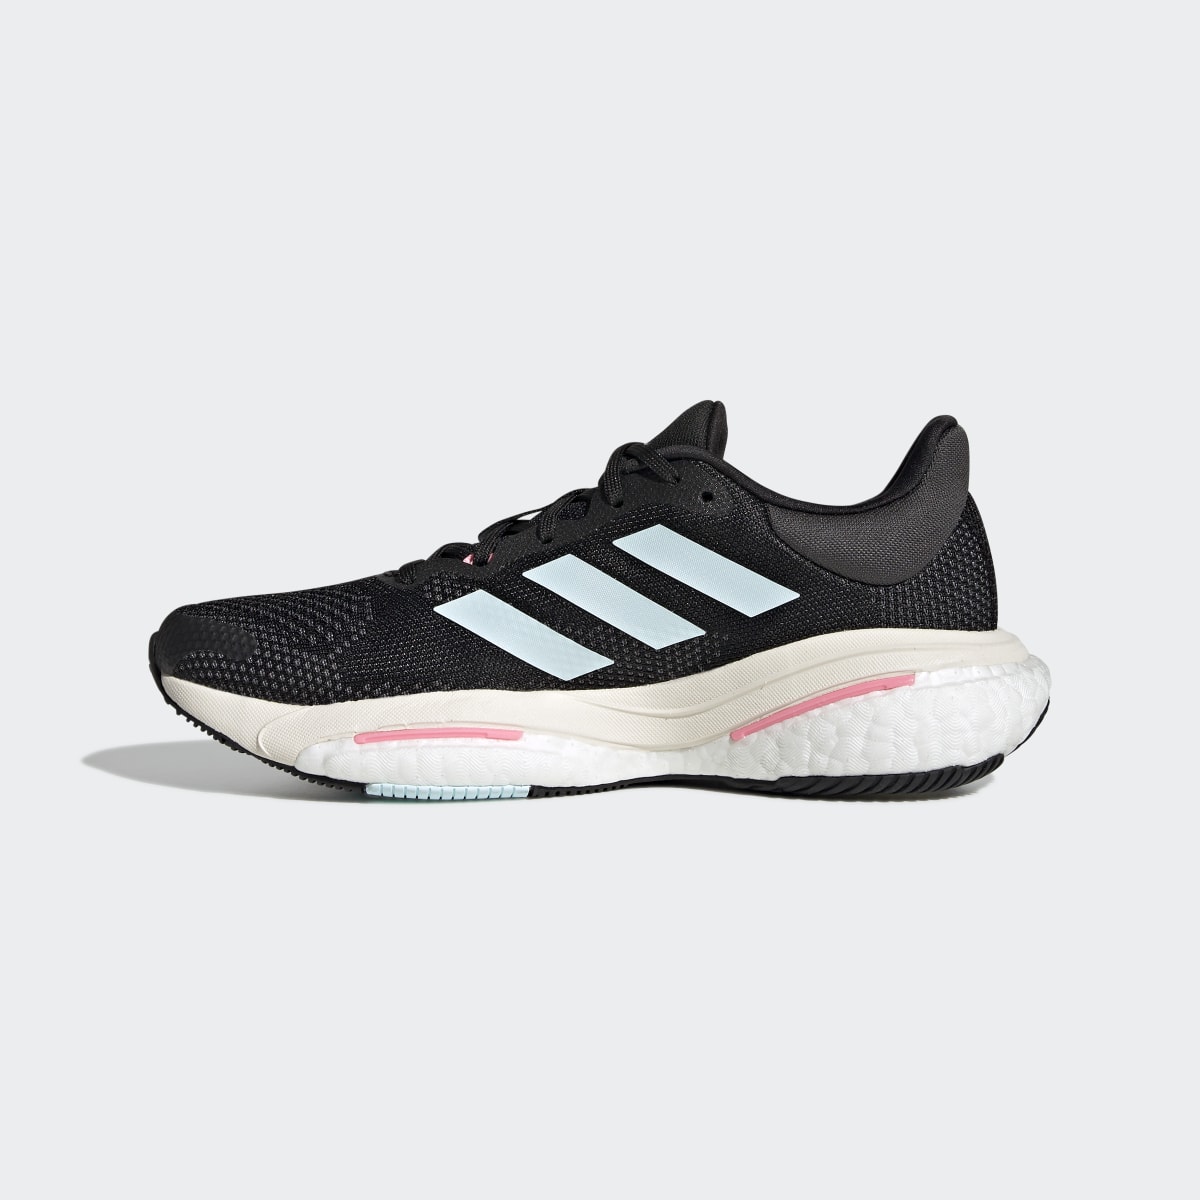 Adidas Solarglide 5 Running Shoes. 7